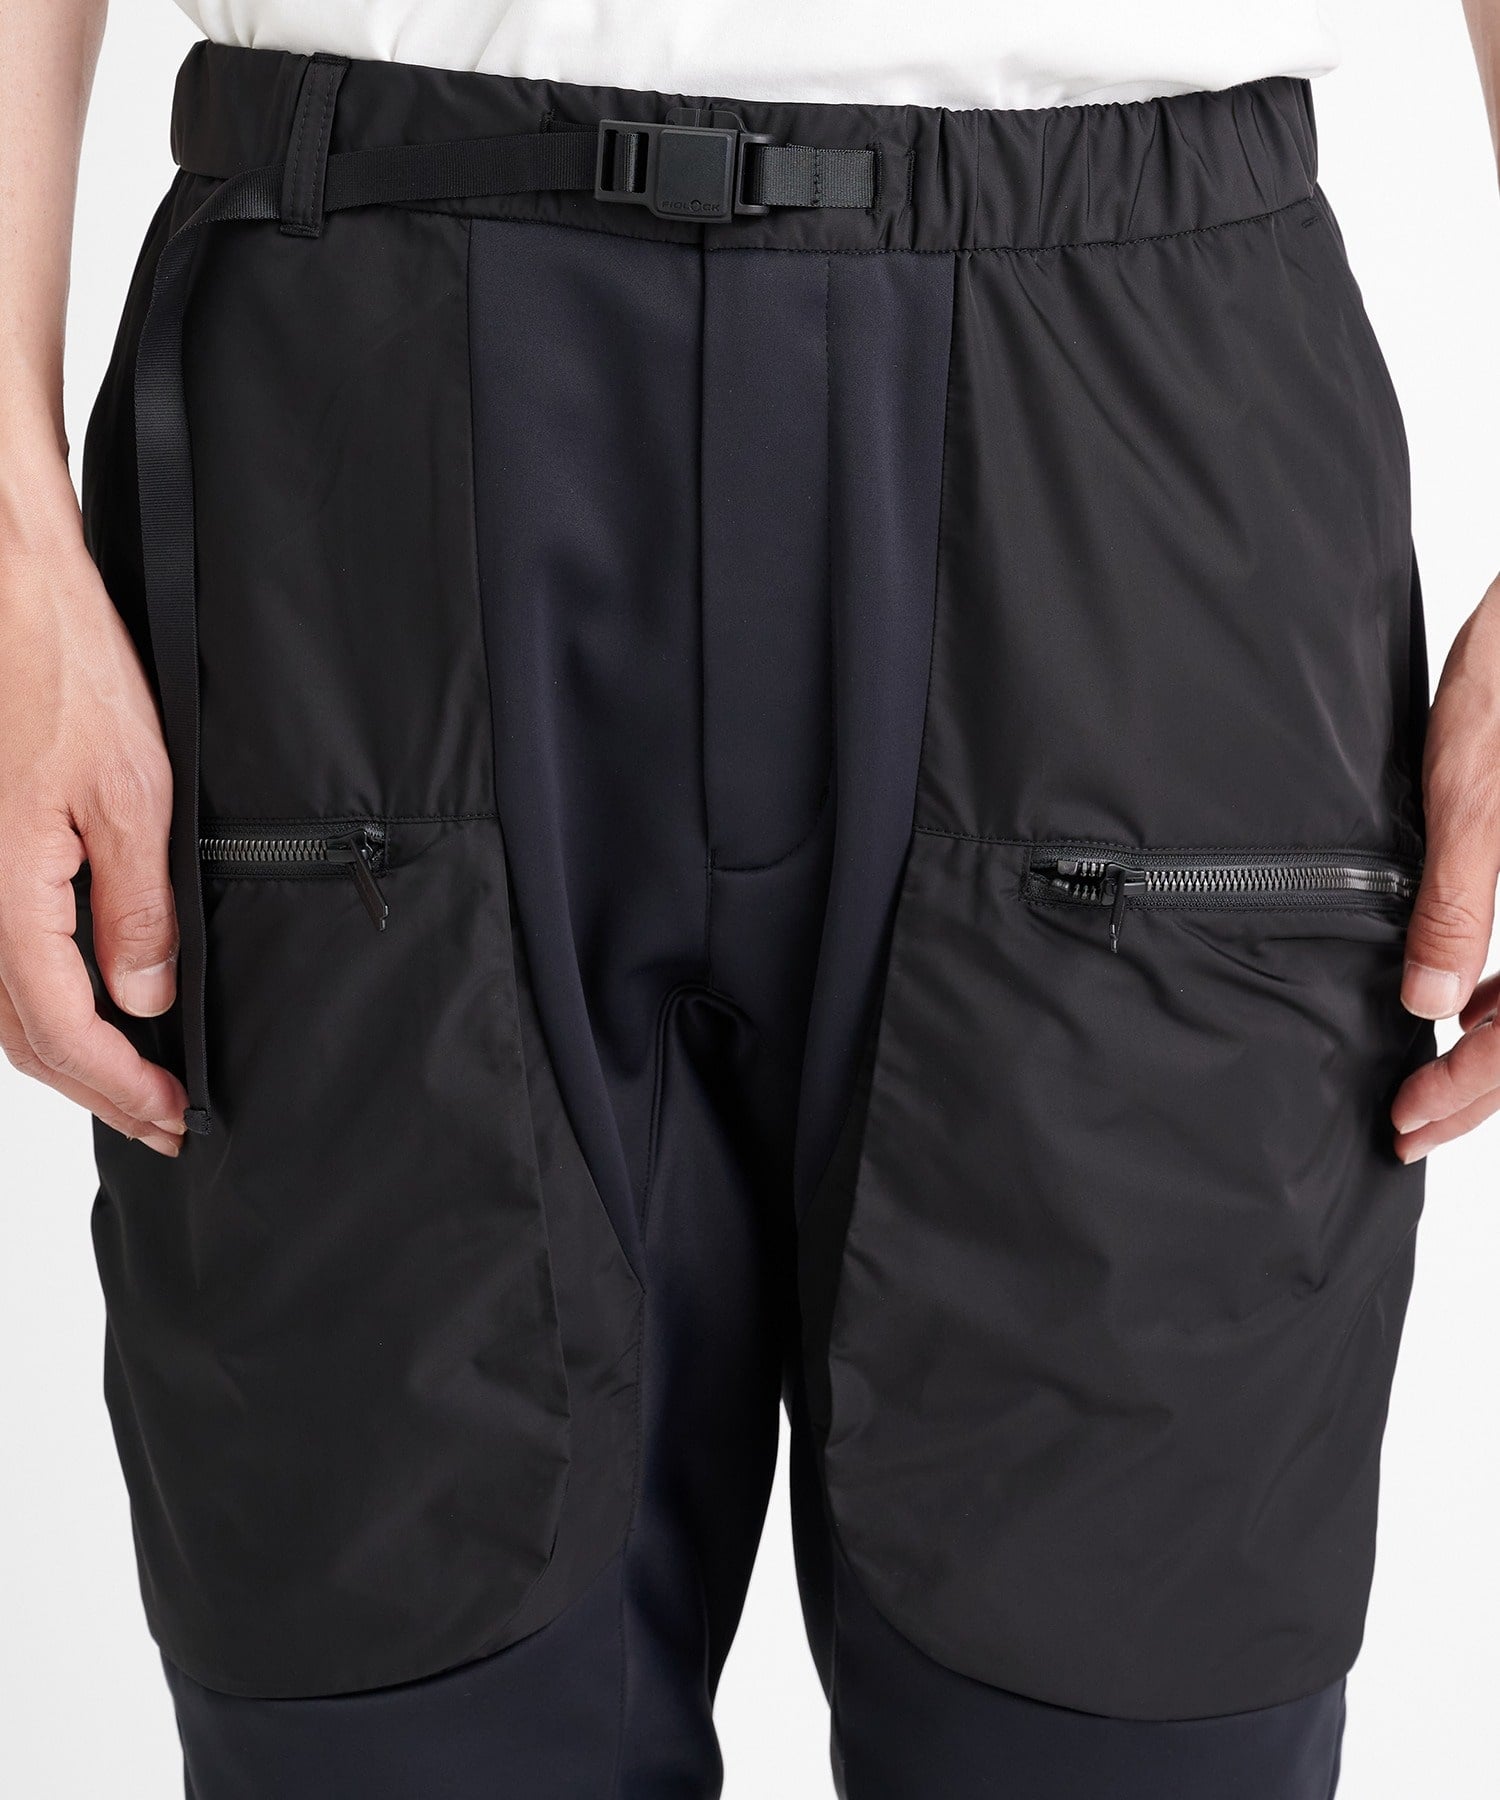 EX. GORE-TEX WINDSTOPPER JERSEY HYBRID PANTS White Mountaineering